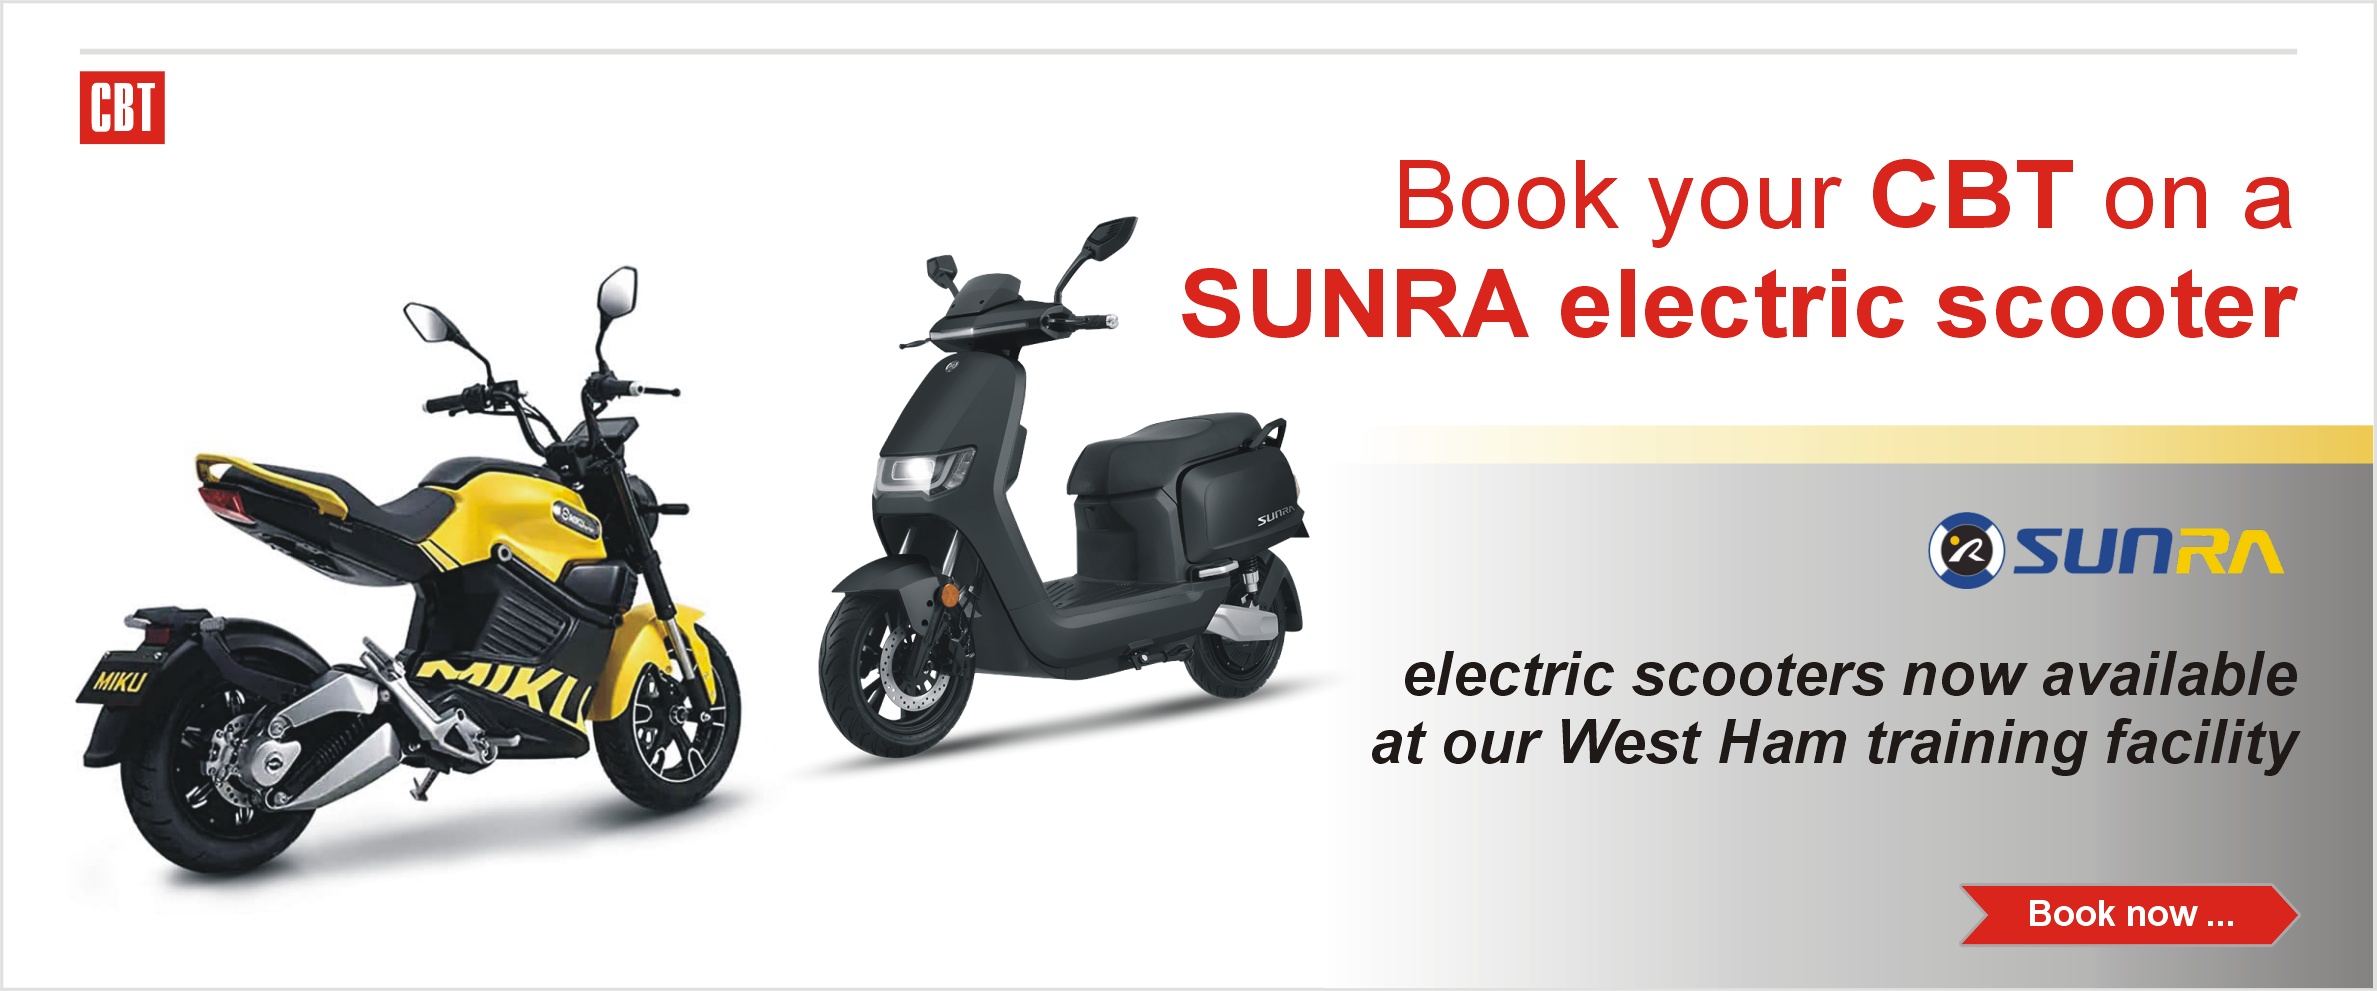 Book your CBT on an Sunra electric scooter